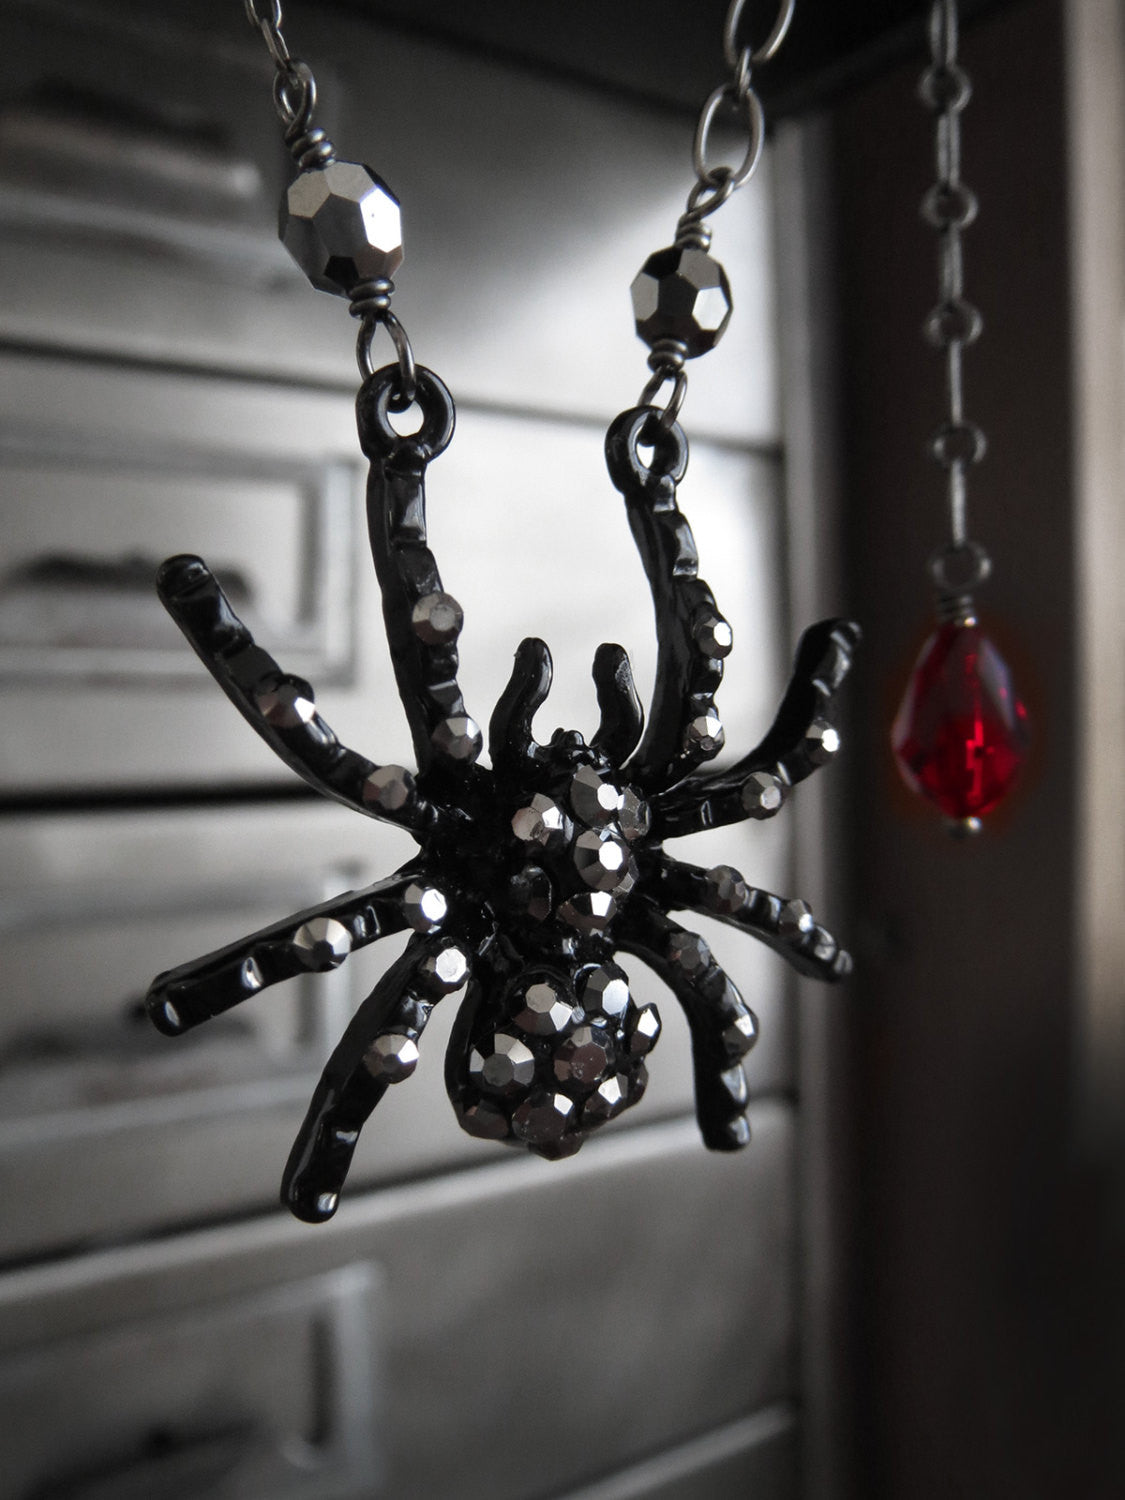 Black Widow Hourglass Necklace ⋆ It's Just So You